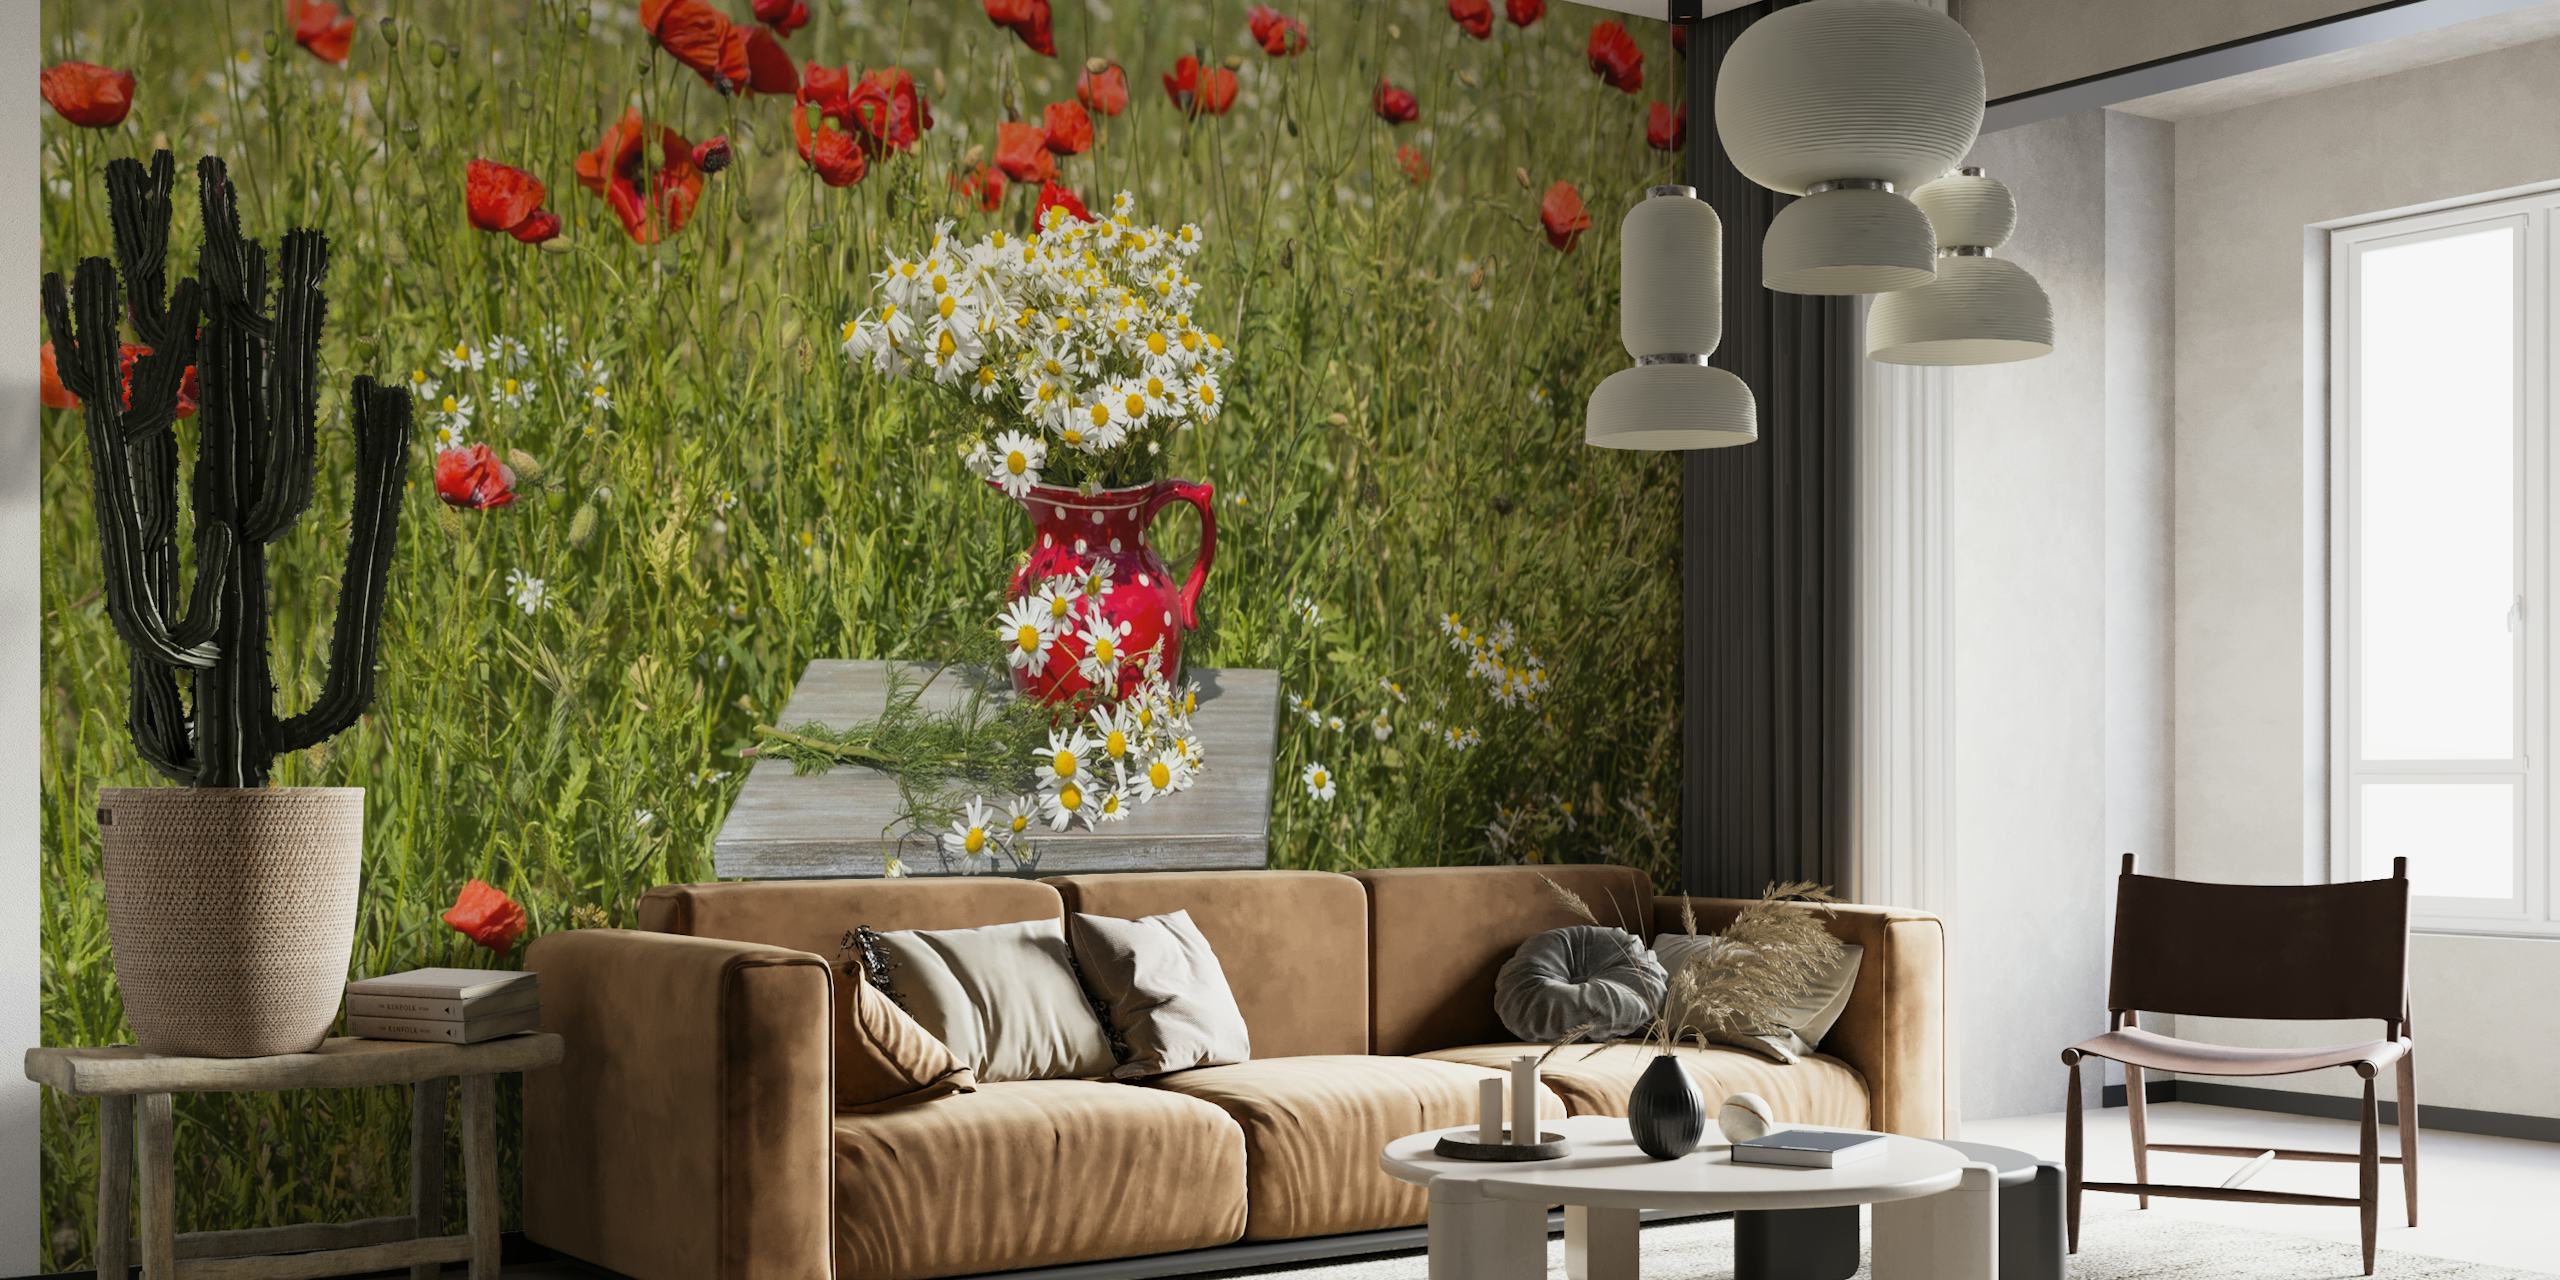 A bouquet of wildflowers in a vase on an old wooden chair set against a meadow with red poppies.